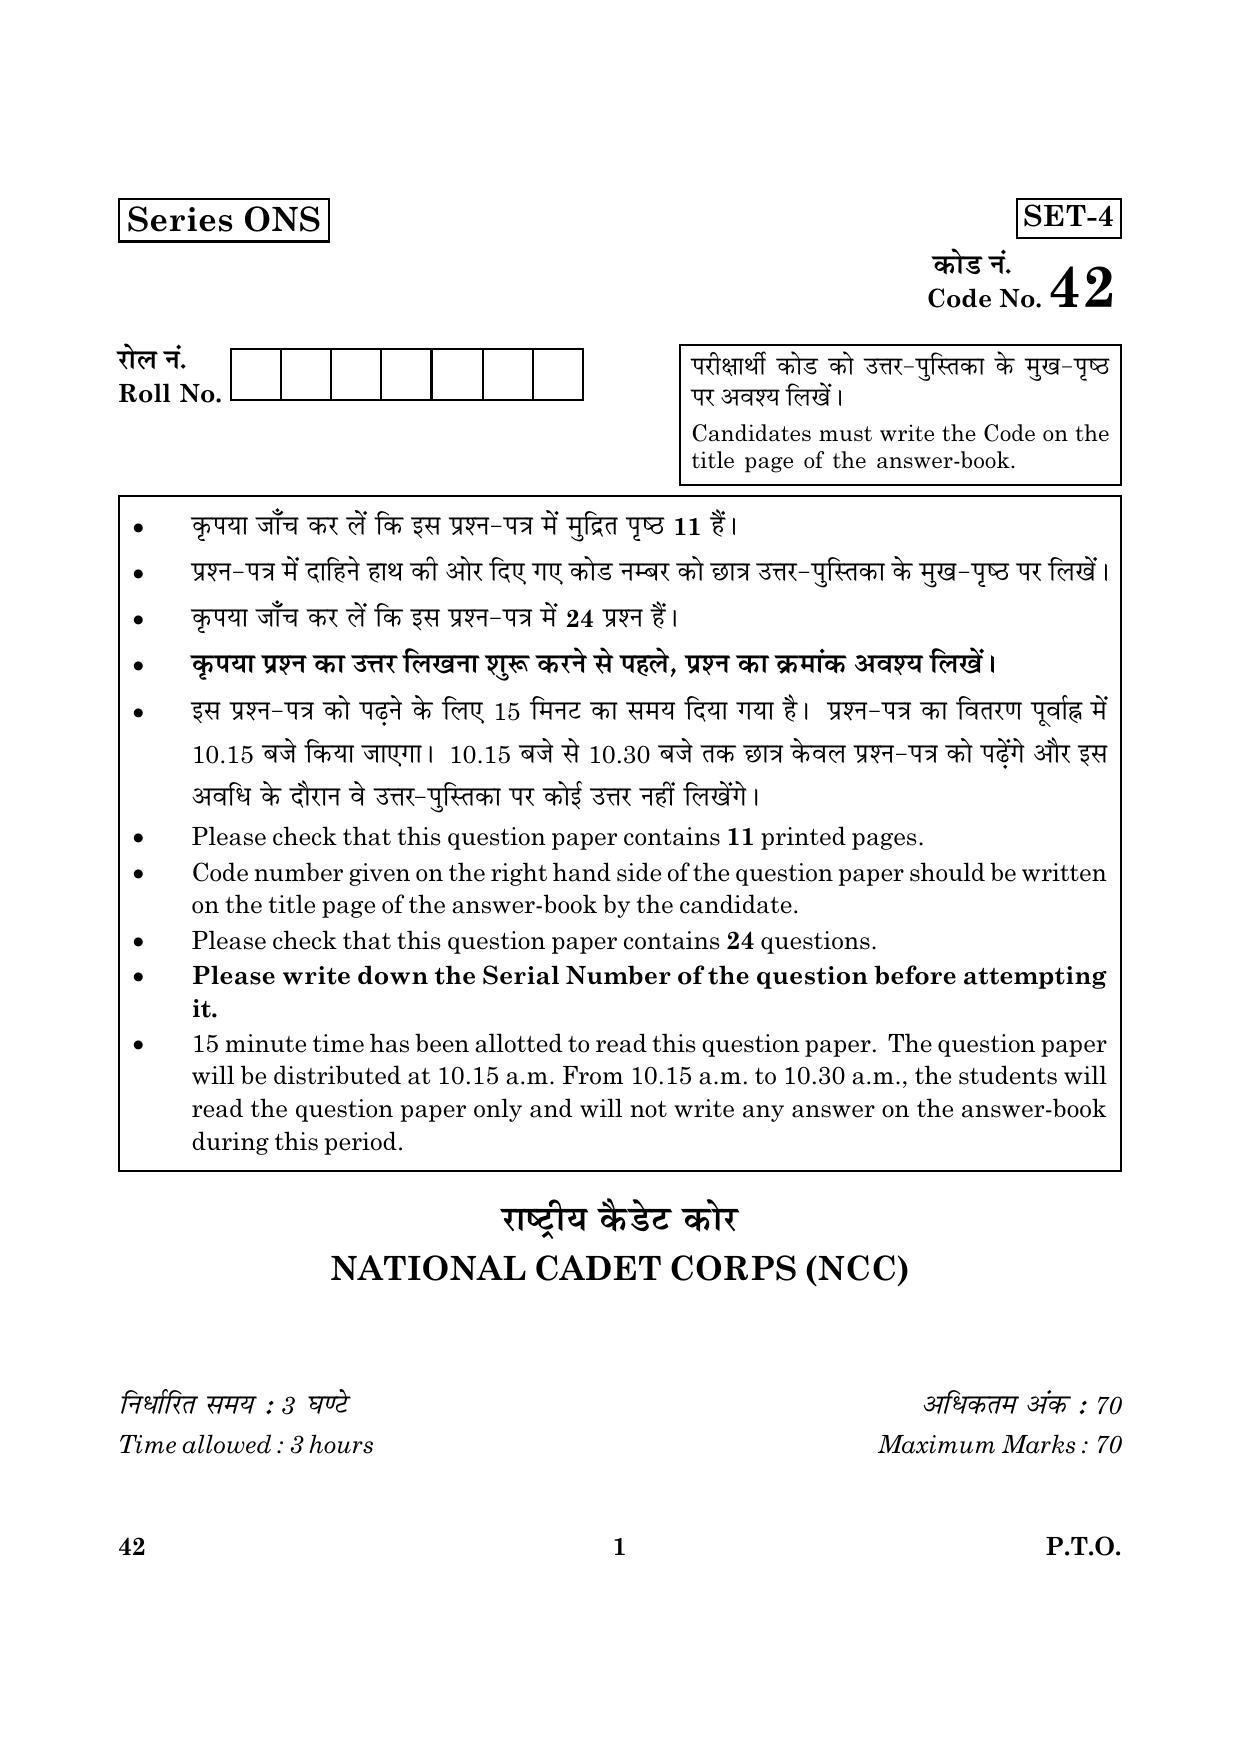 CBSE Class 12 042 National Cadet Corps (NCC) 2016 Question Paper - Page 1